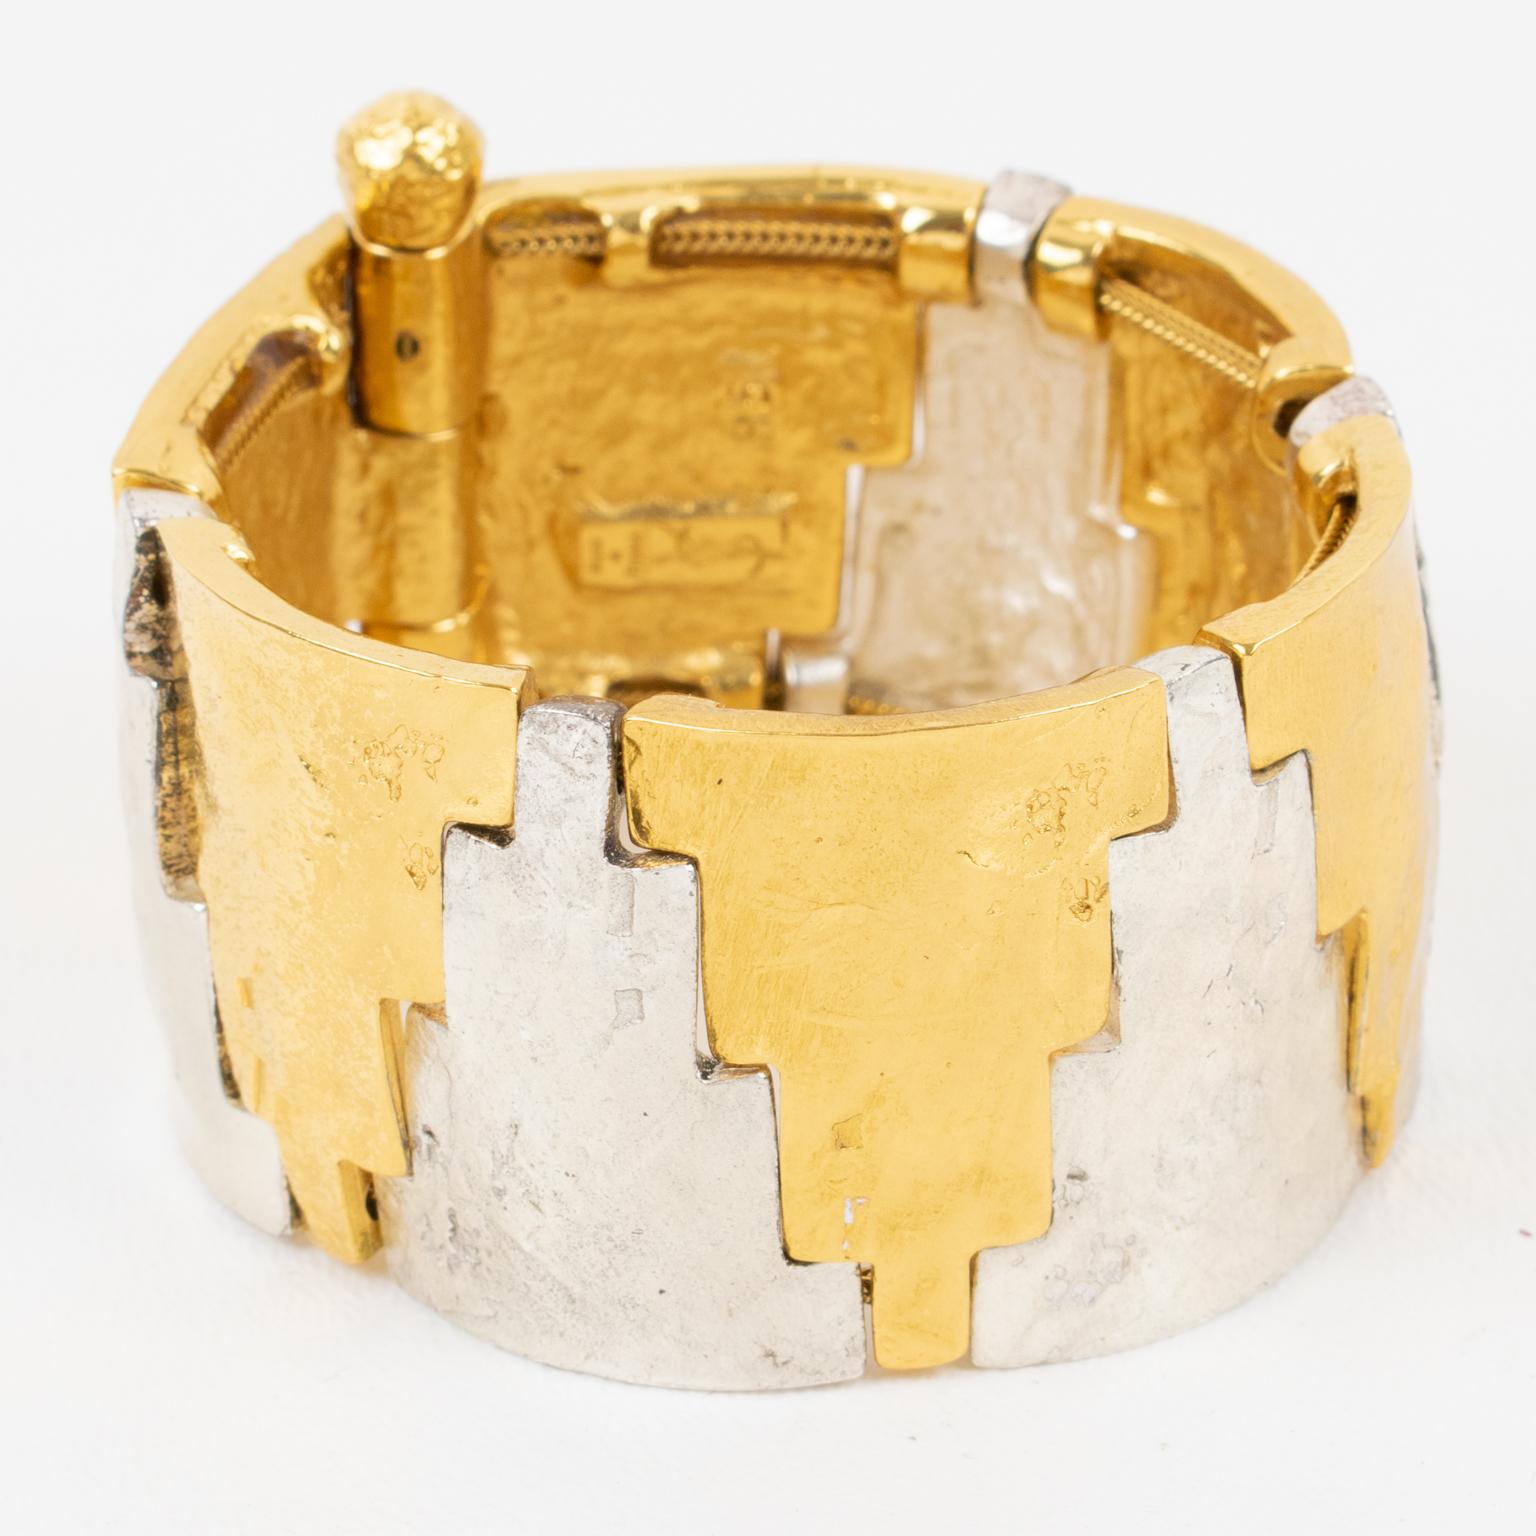 Refined Yves Saint Laurent Paris link bracelet bangle designed by Robert Goossens. The piece features geometric elements in gilt metal and silver plate metal all textured with a hand-made feel. The bracelet is built with a double serpentine chain